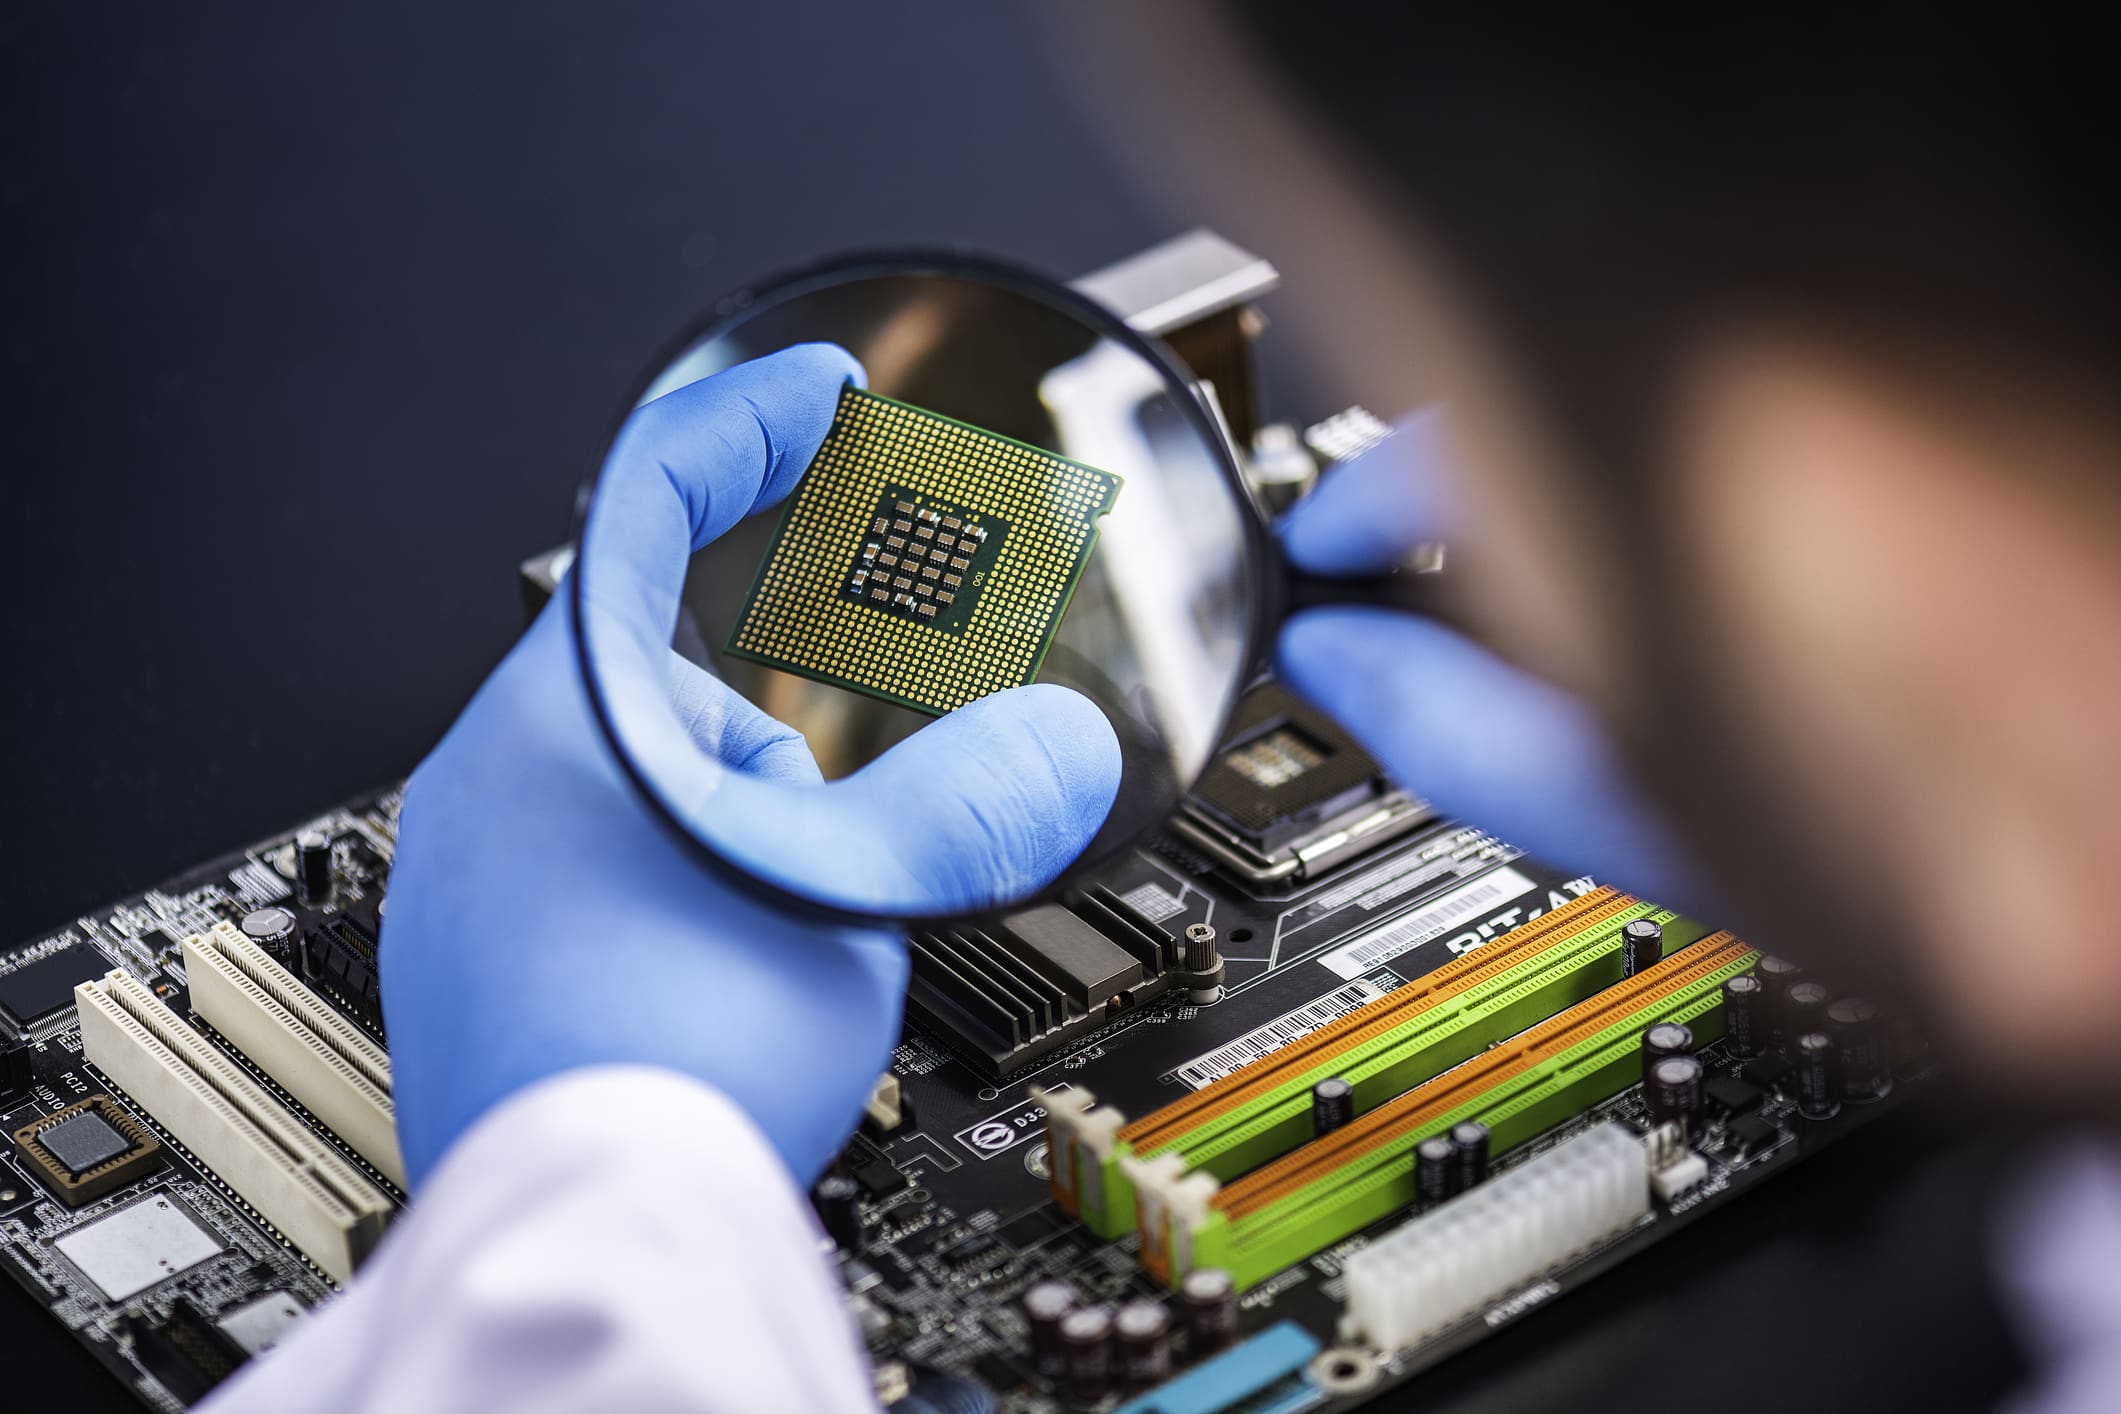 5 big issues from regulation and EVs to semiconductors